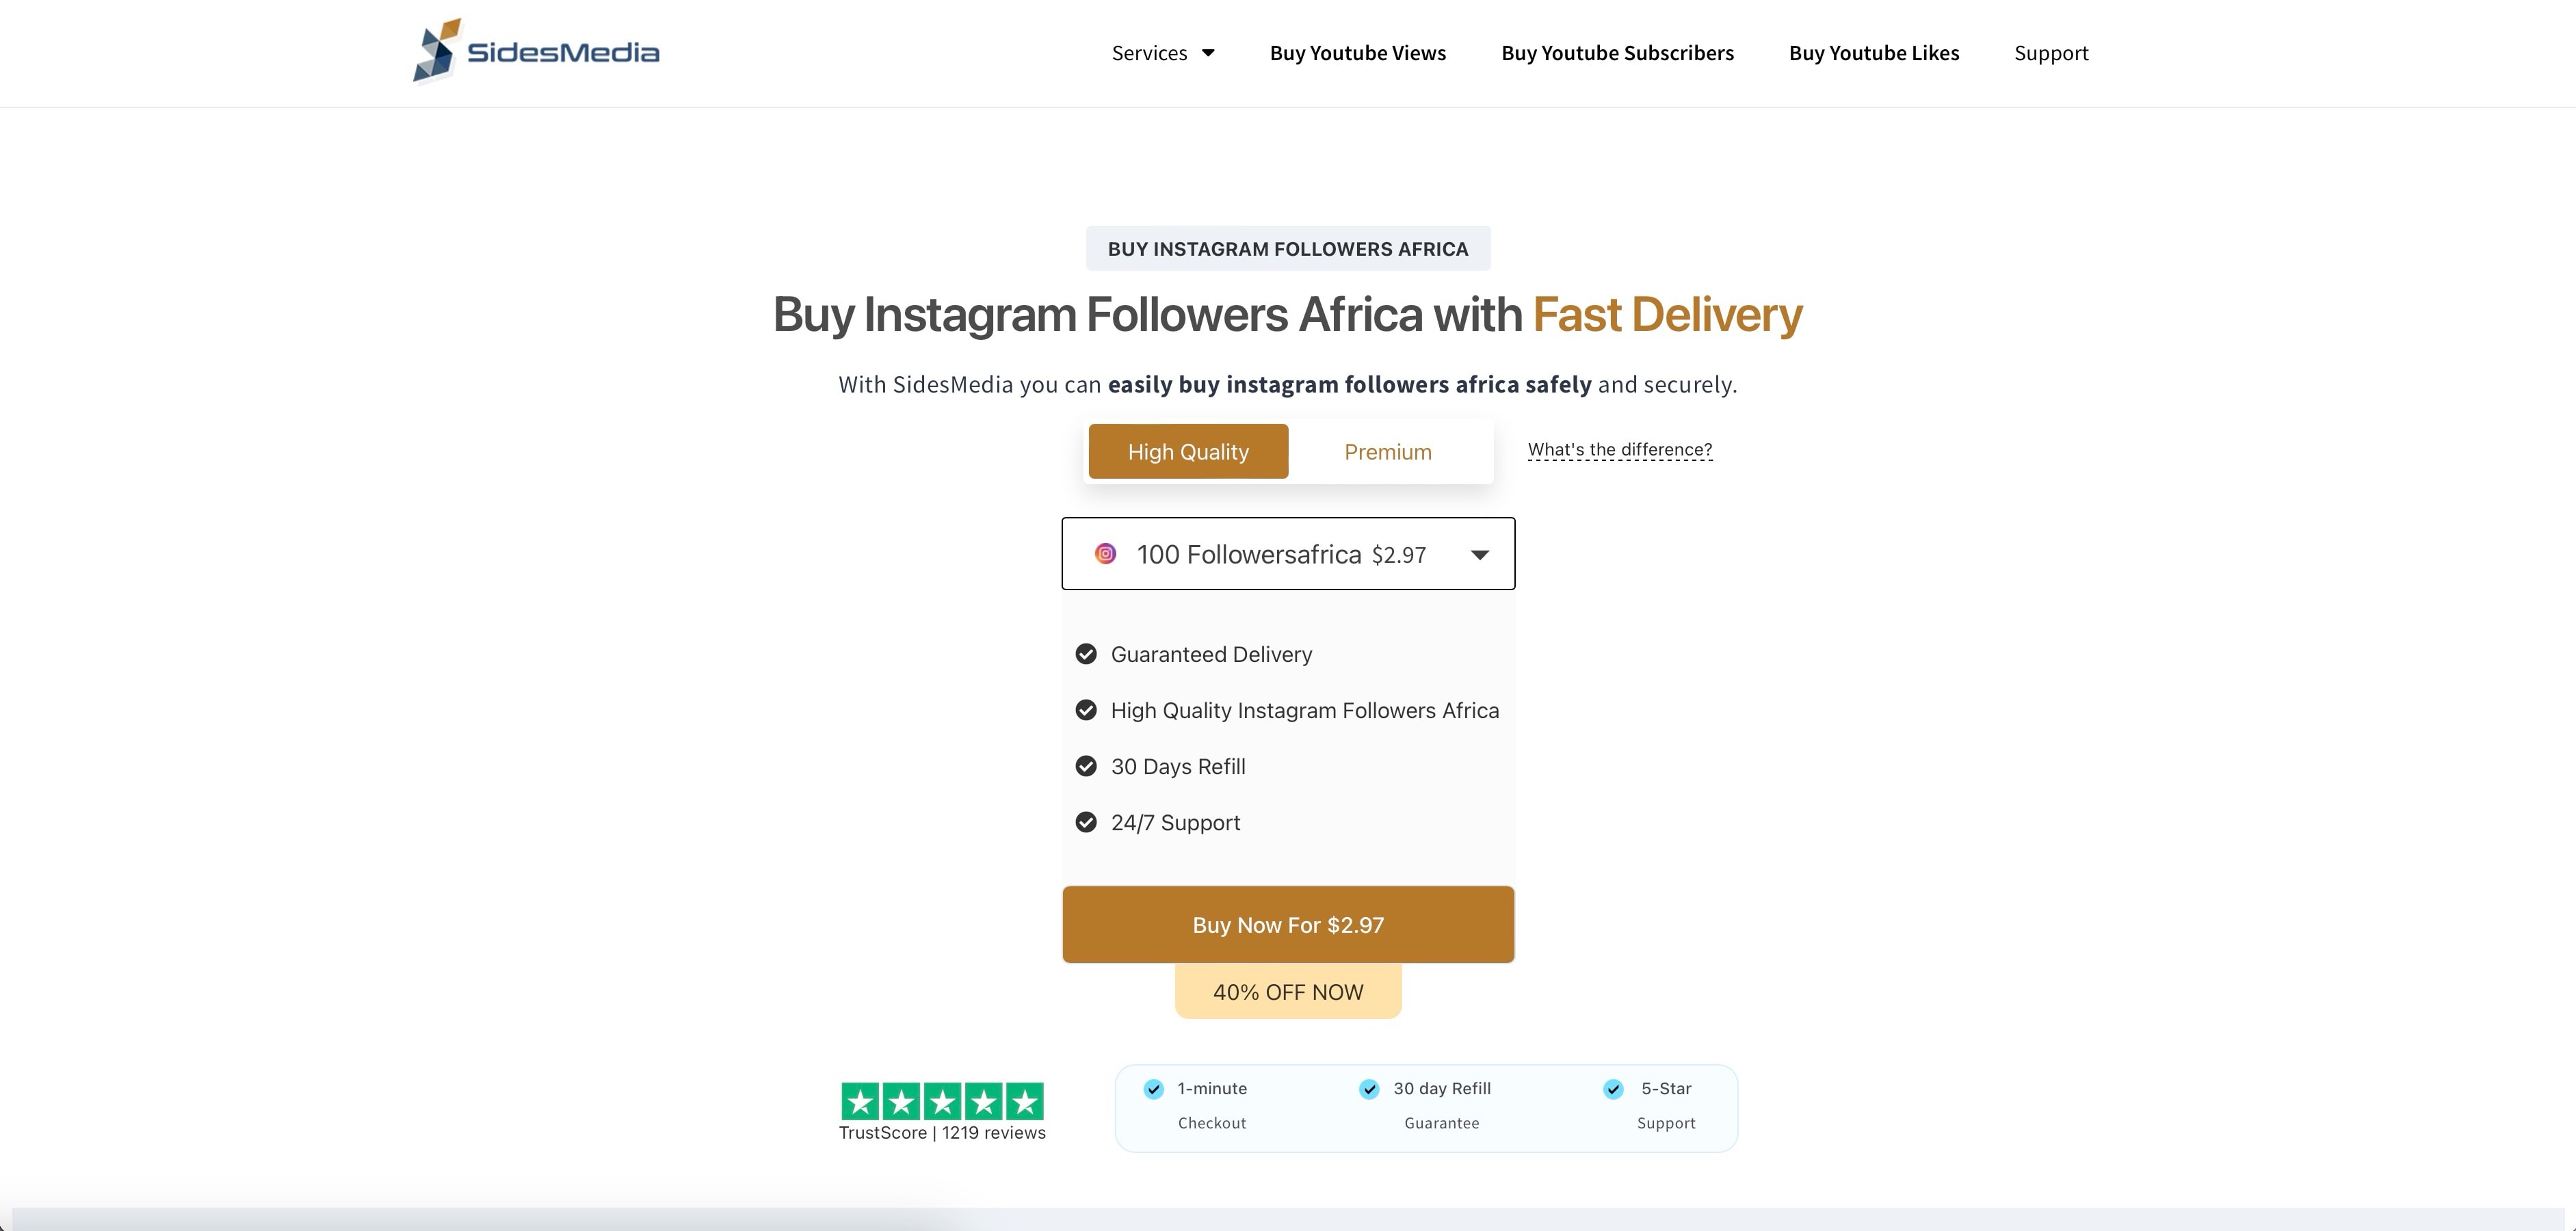 sidesmedia buy instagram followers africa page